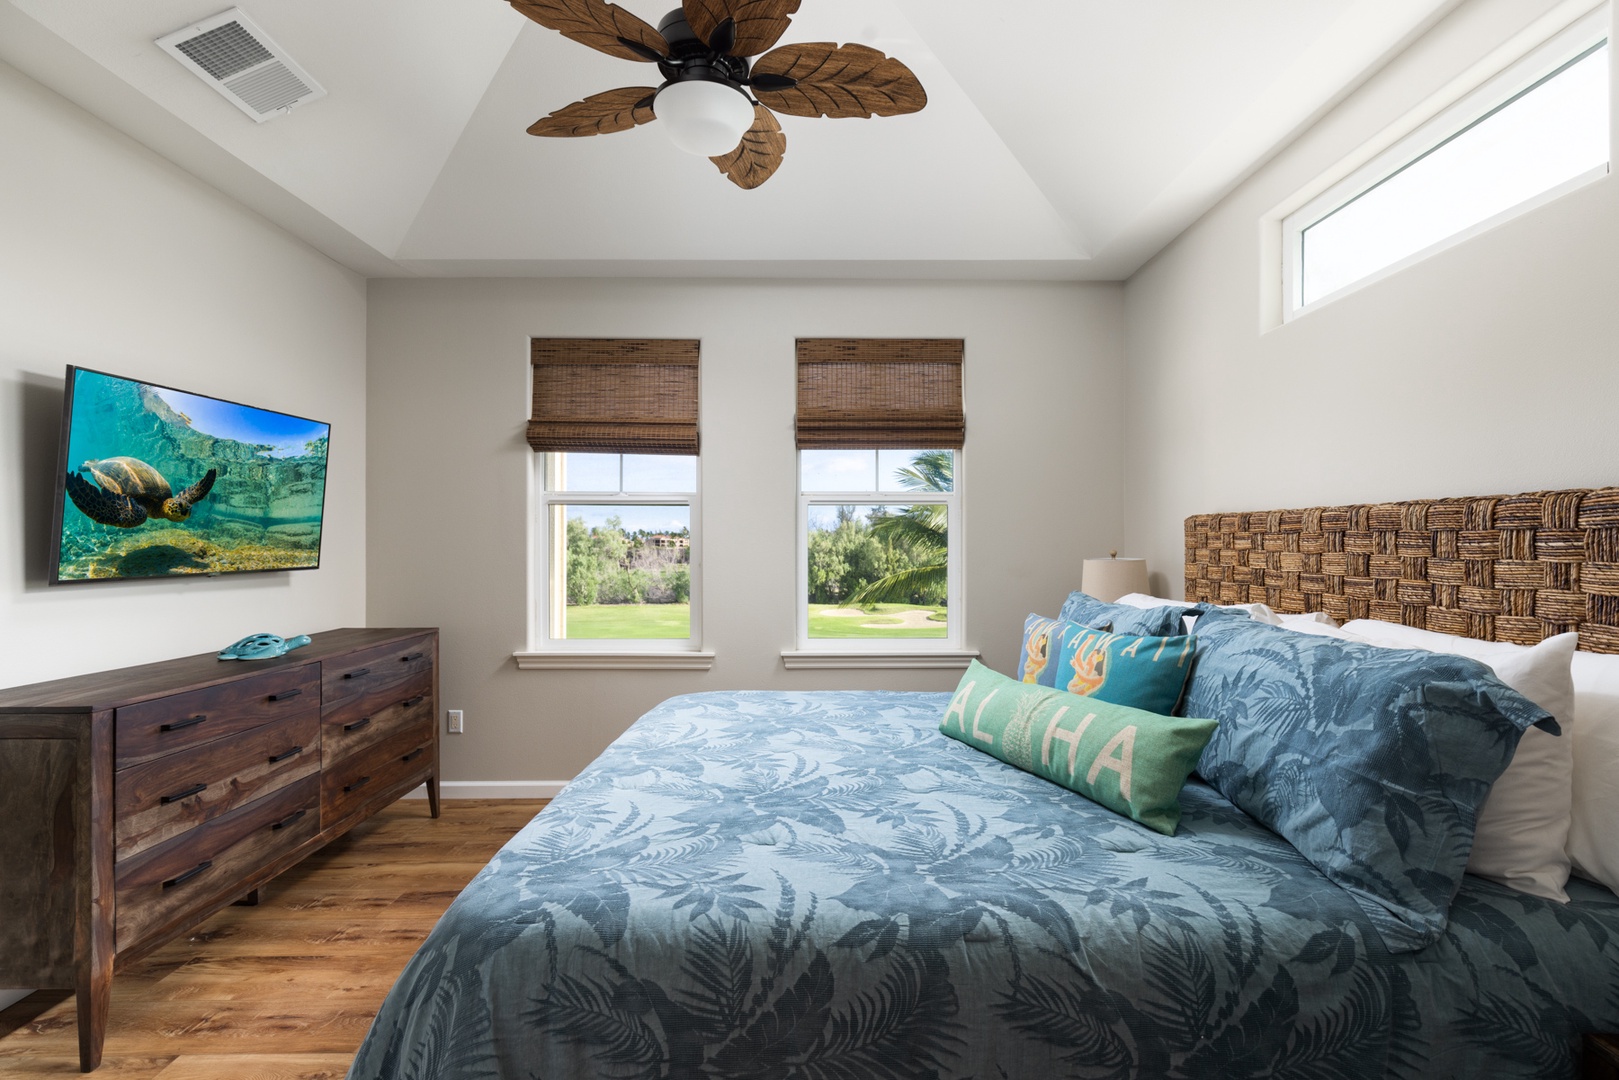 Waikoloa Vacation Rentals, Fairway Villas at Waikoloa Beach Resort E34 - Catch up on the news or watch a movie in the king primary bedroom